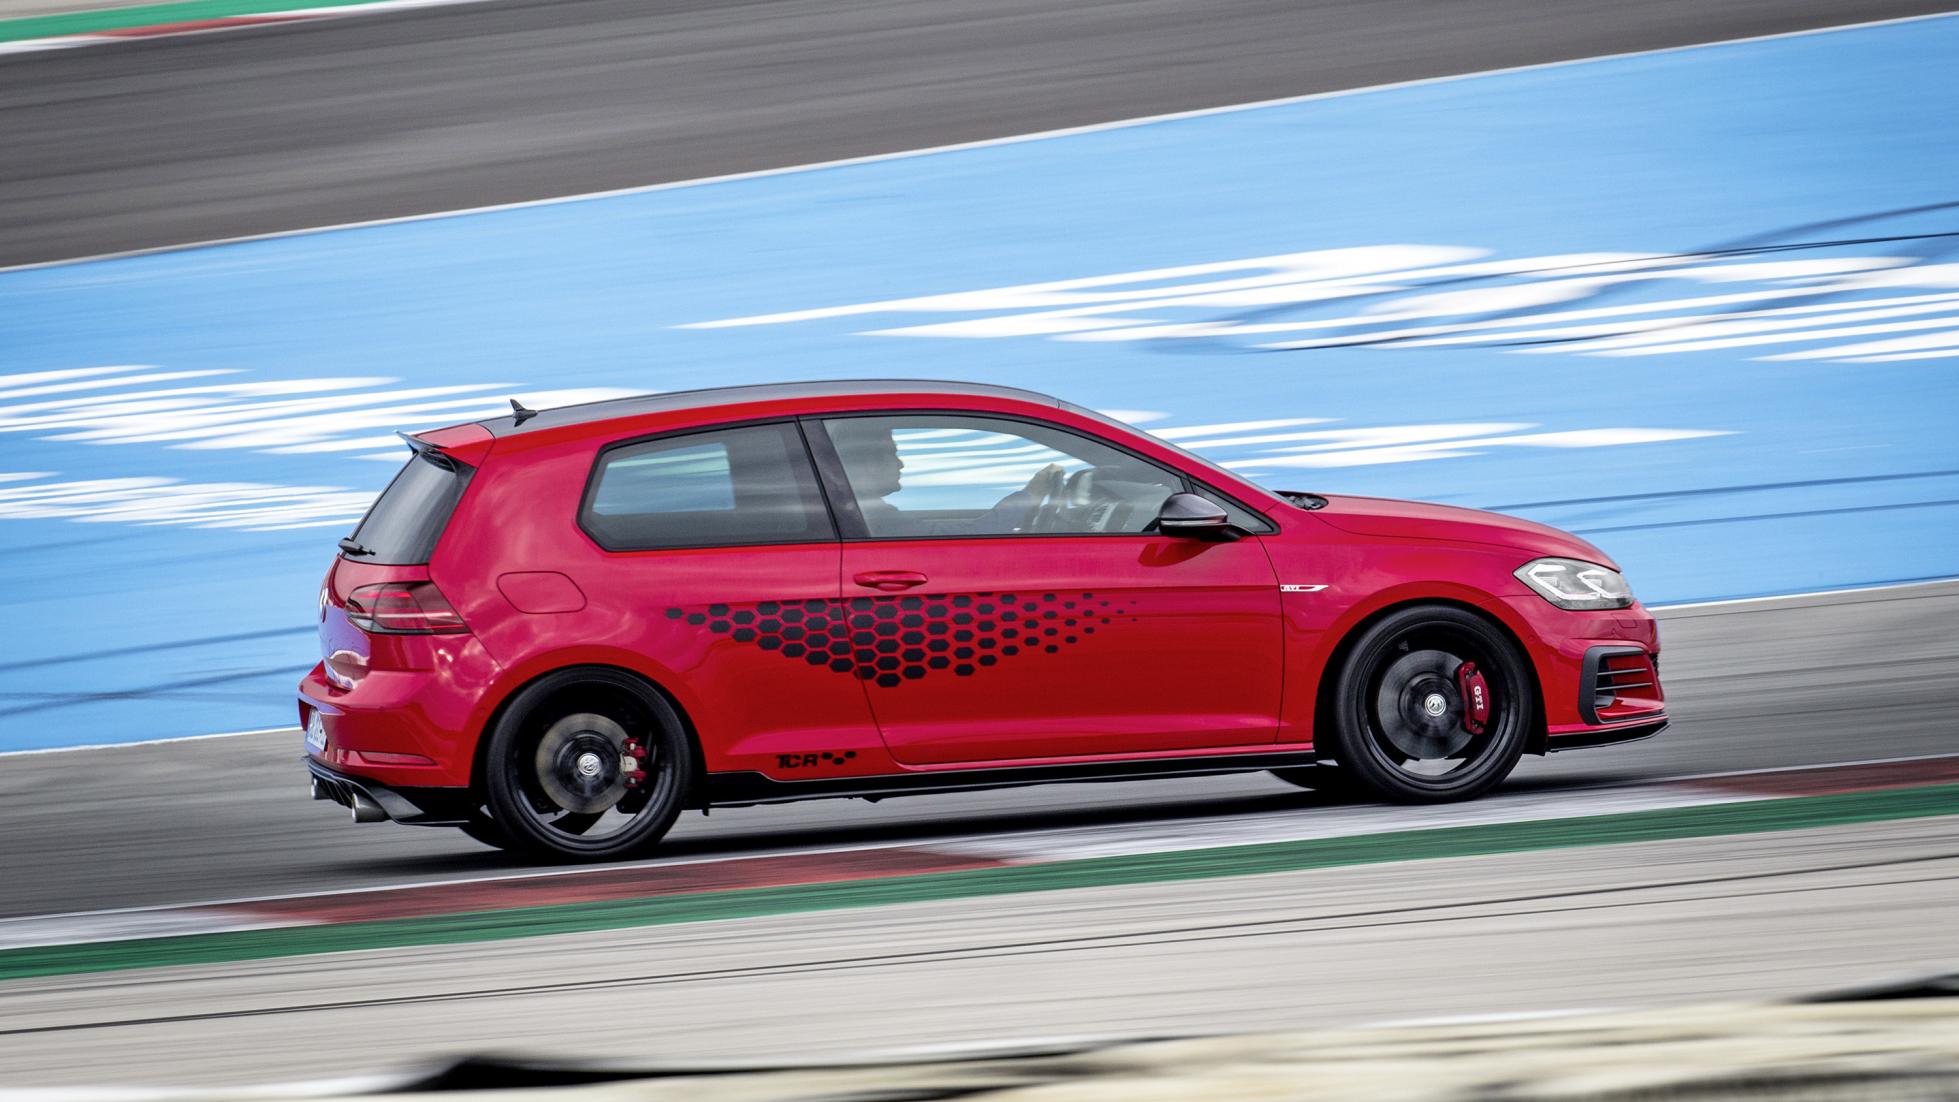 Topgear Vw Golf Gti Tcr Review Harder Edged Hot Hatch Driven 9561